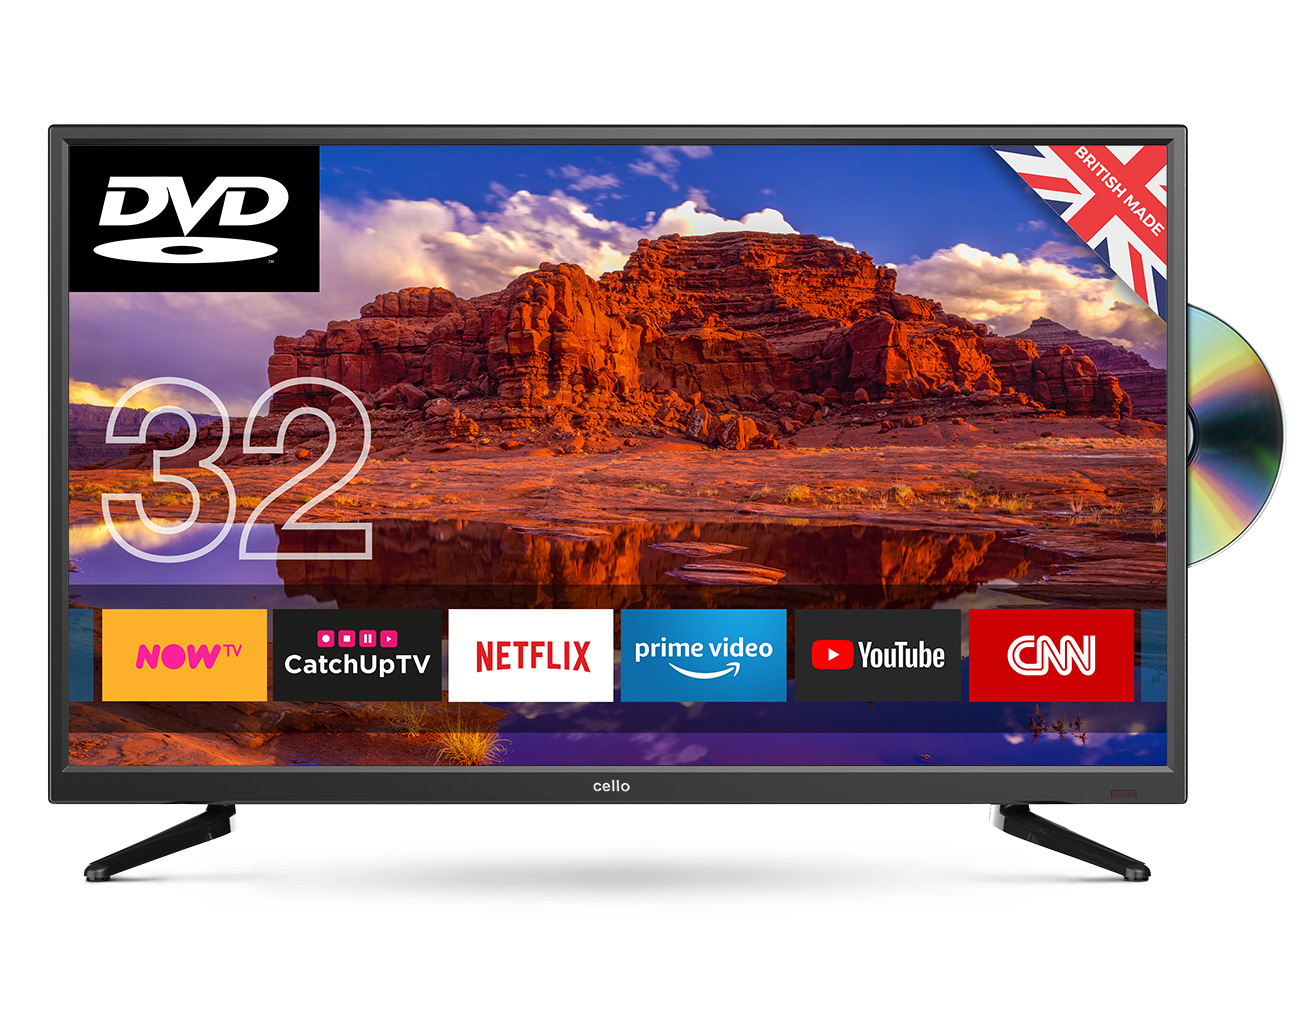 Cello 32in HD Ready LED TV